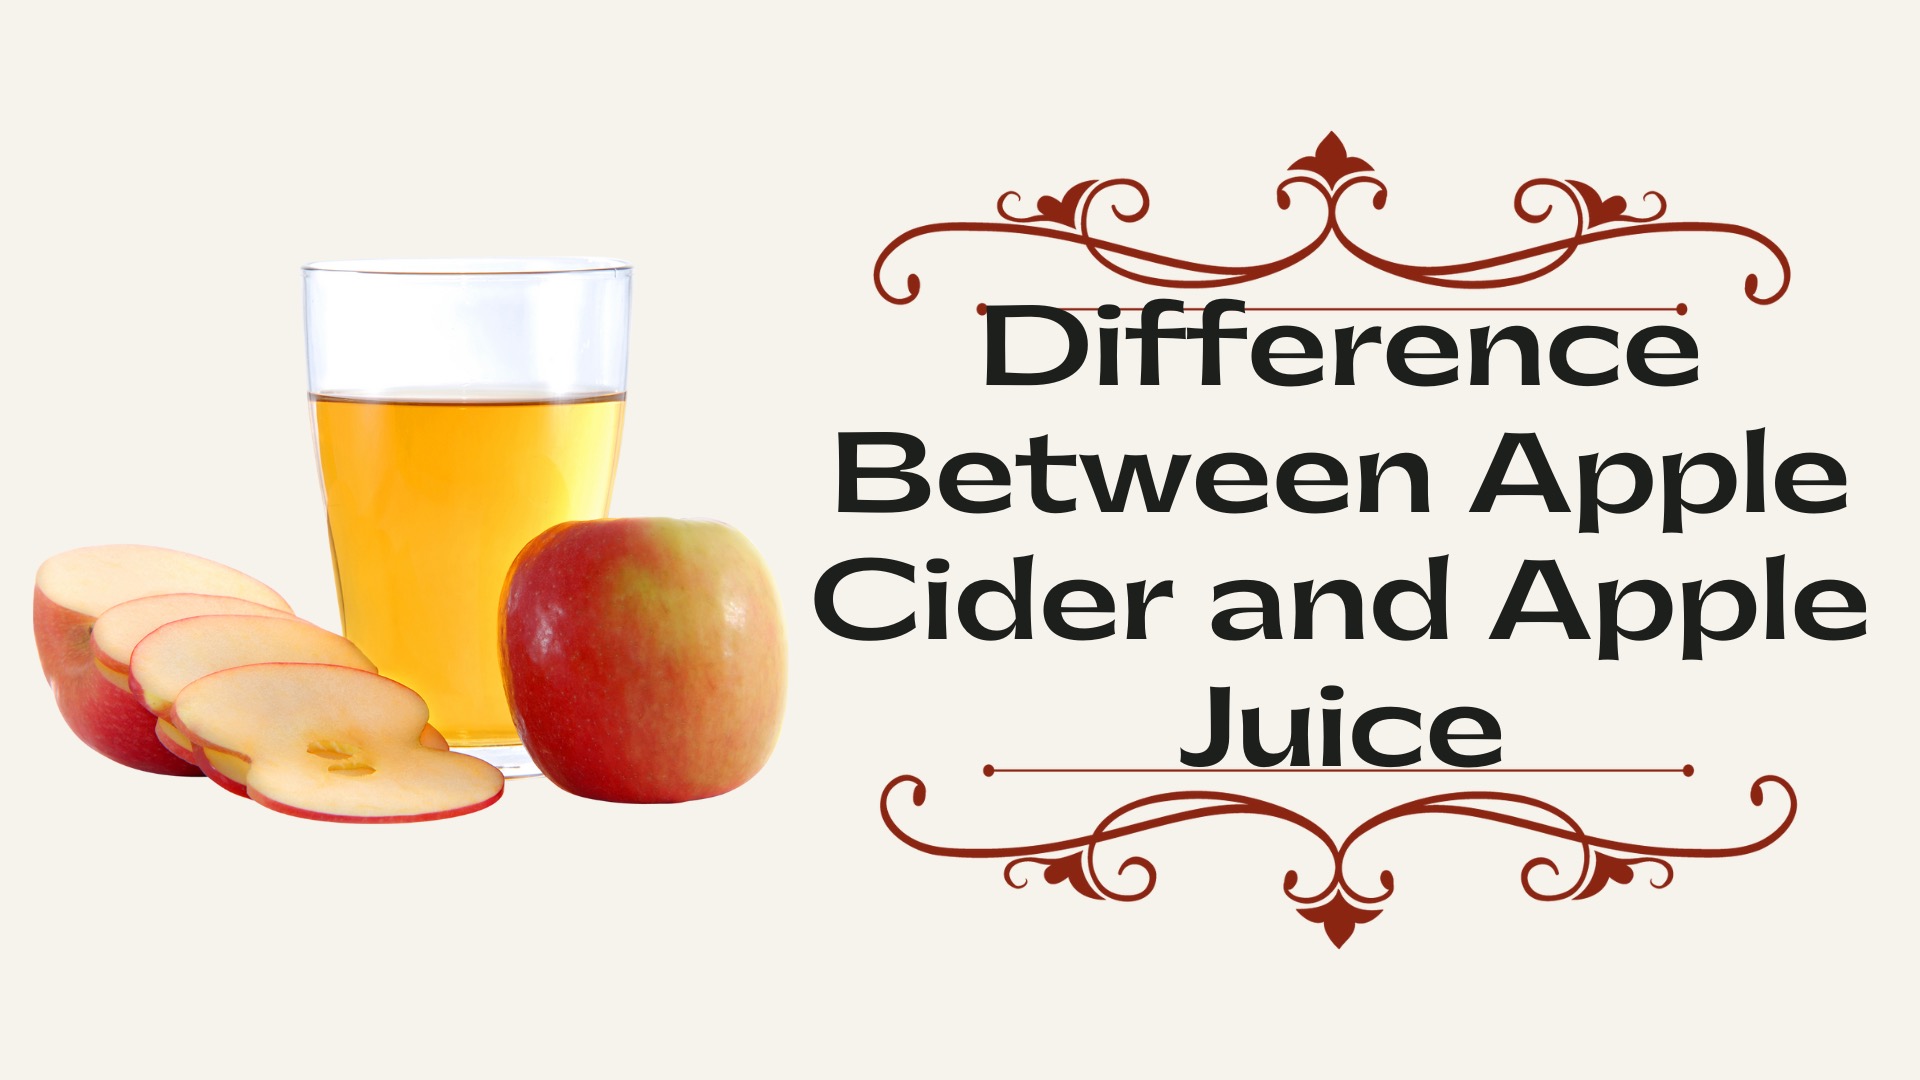 Difference Between Apple Cider and Apple Juice